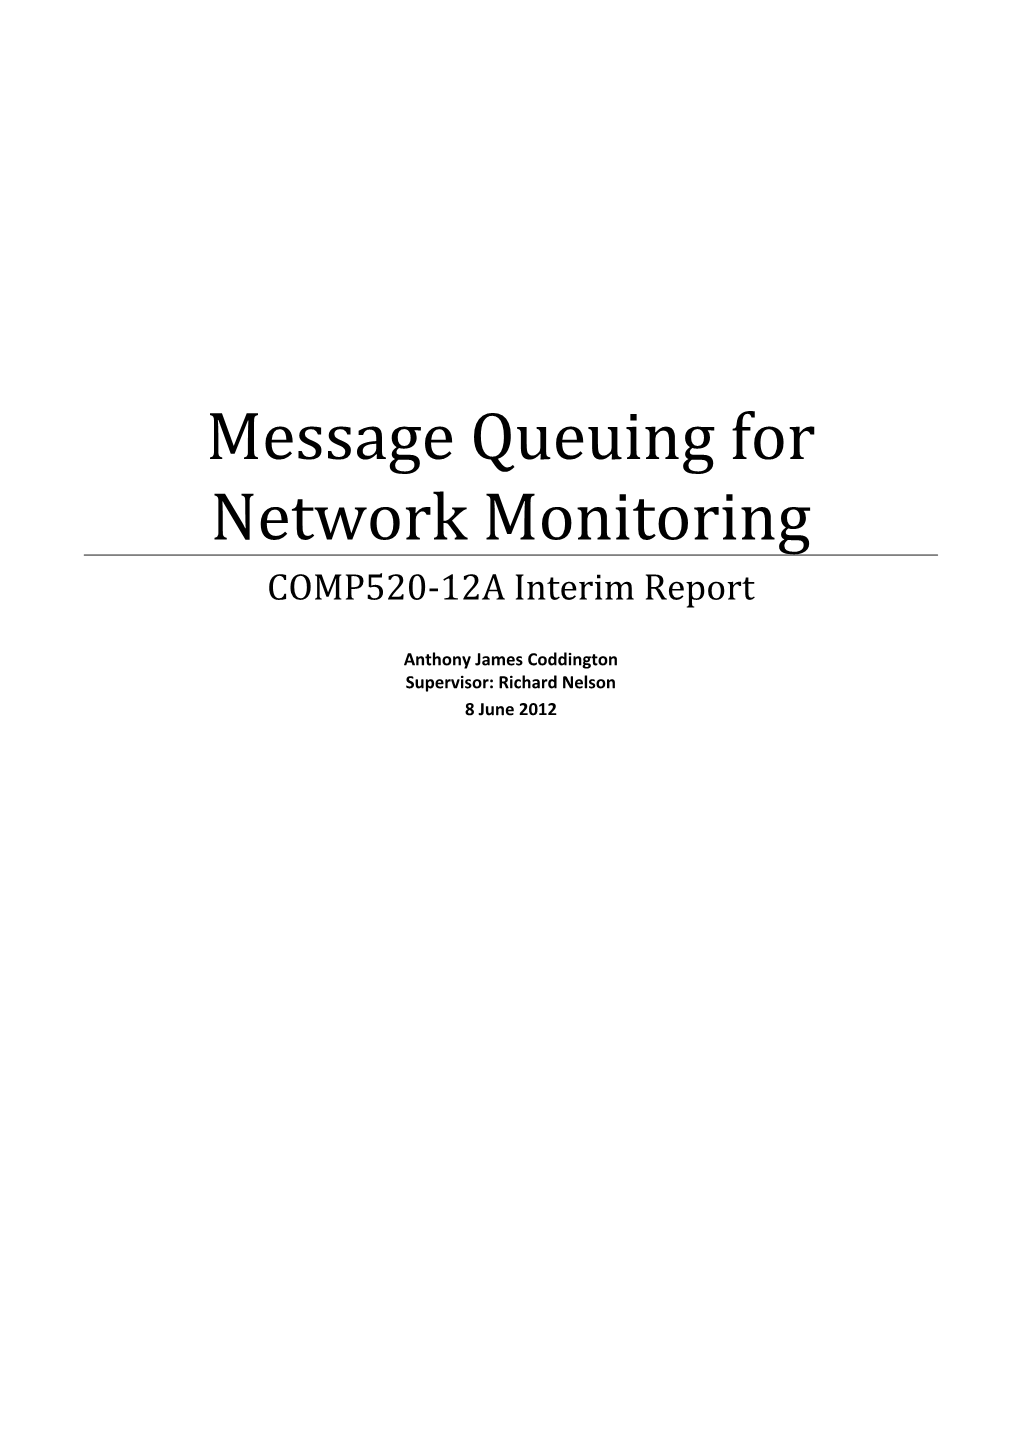 Message Queuing for Network Monitoring